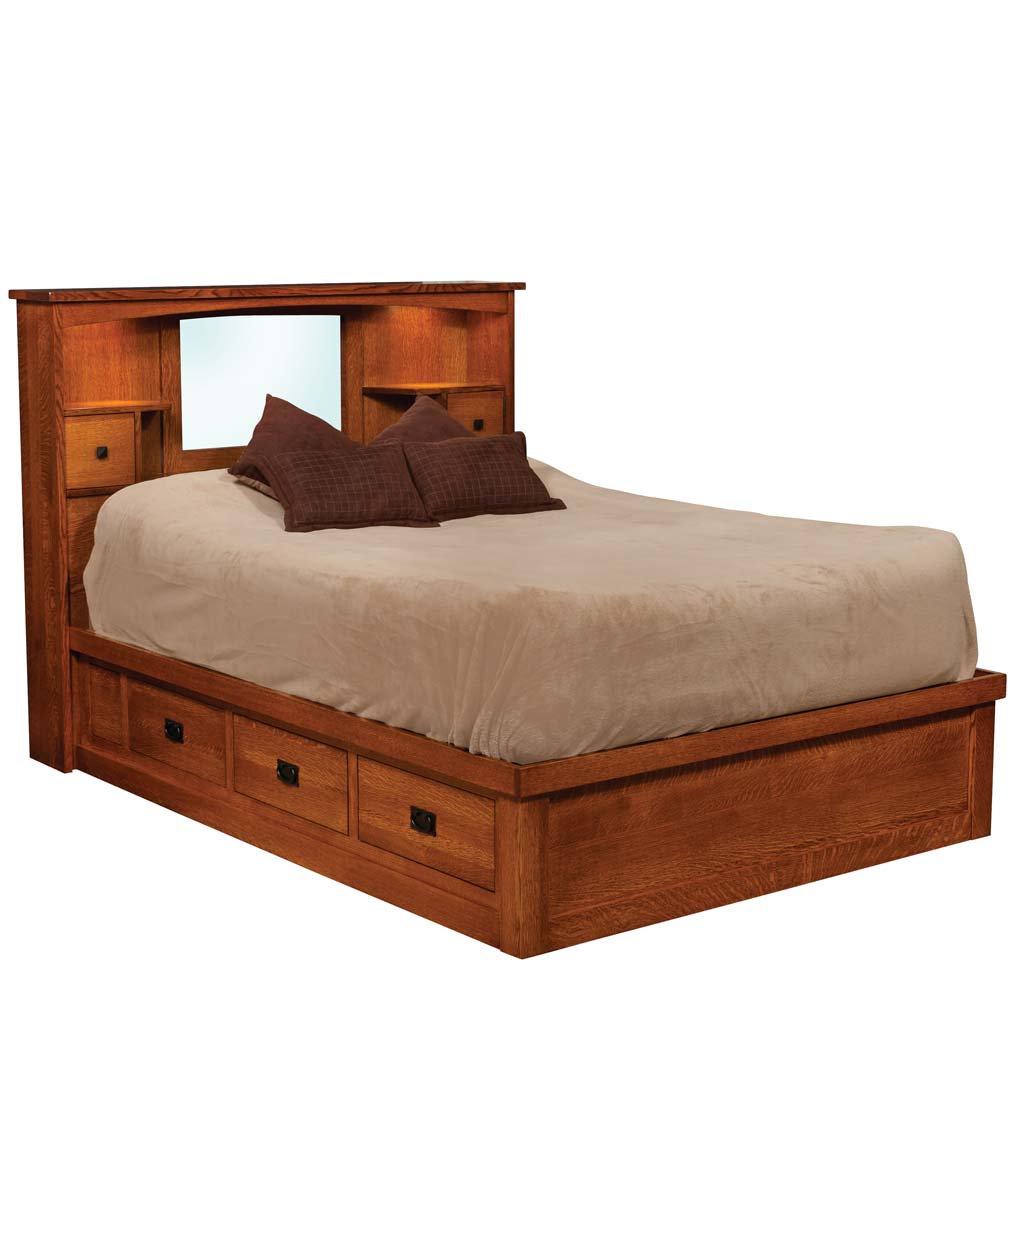 Captains Mission Bed Amish Direct, Mission Style King Size Bed